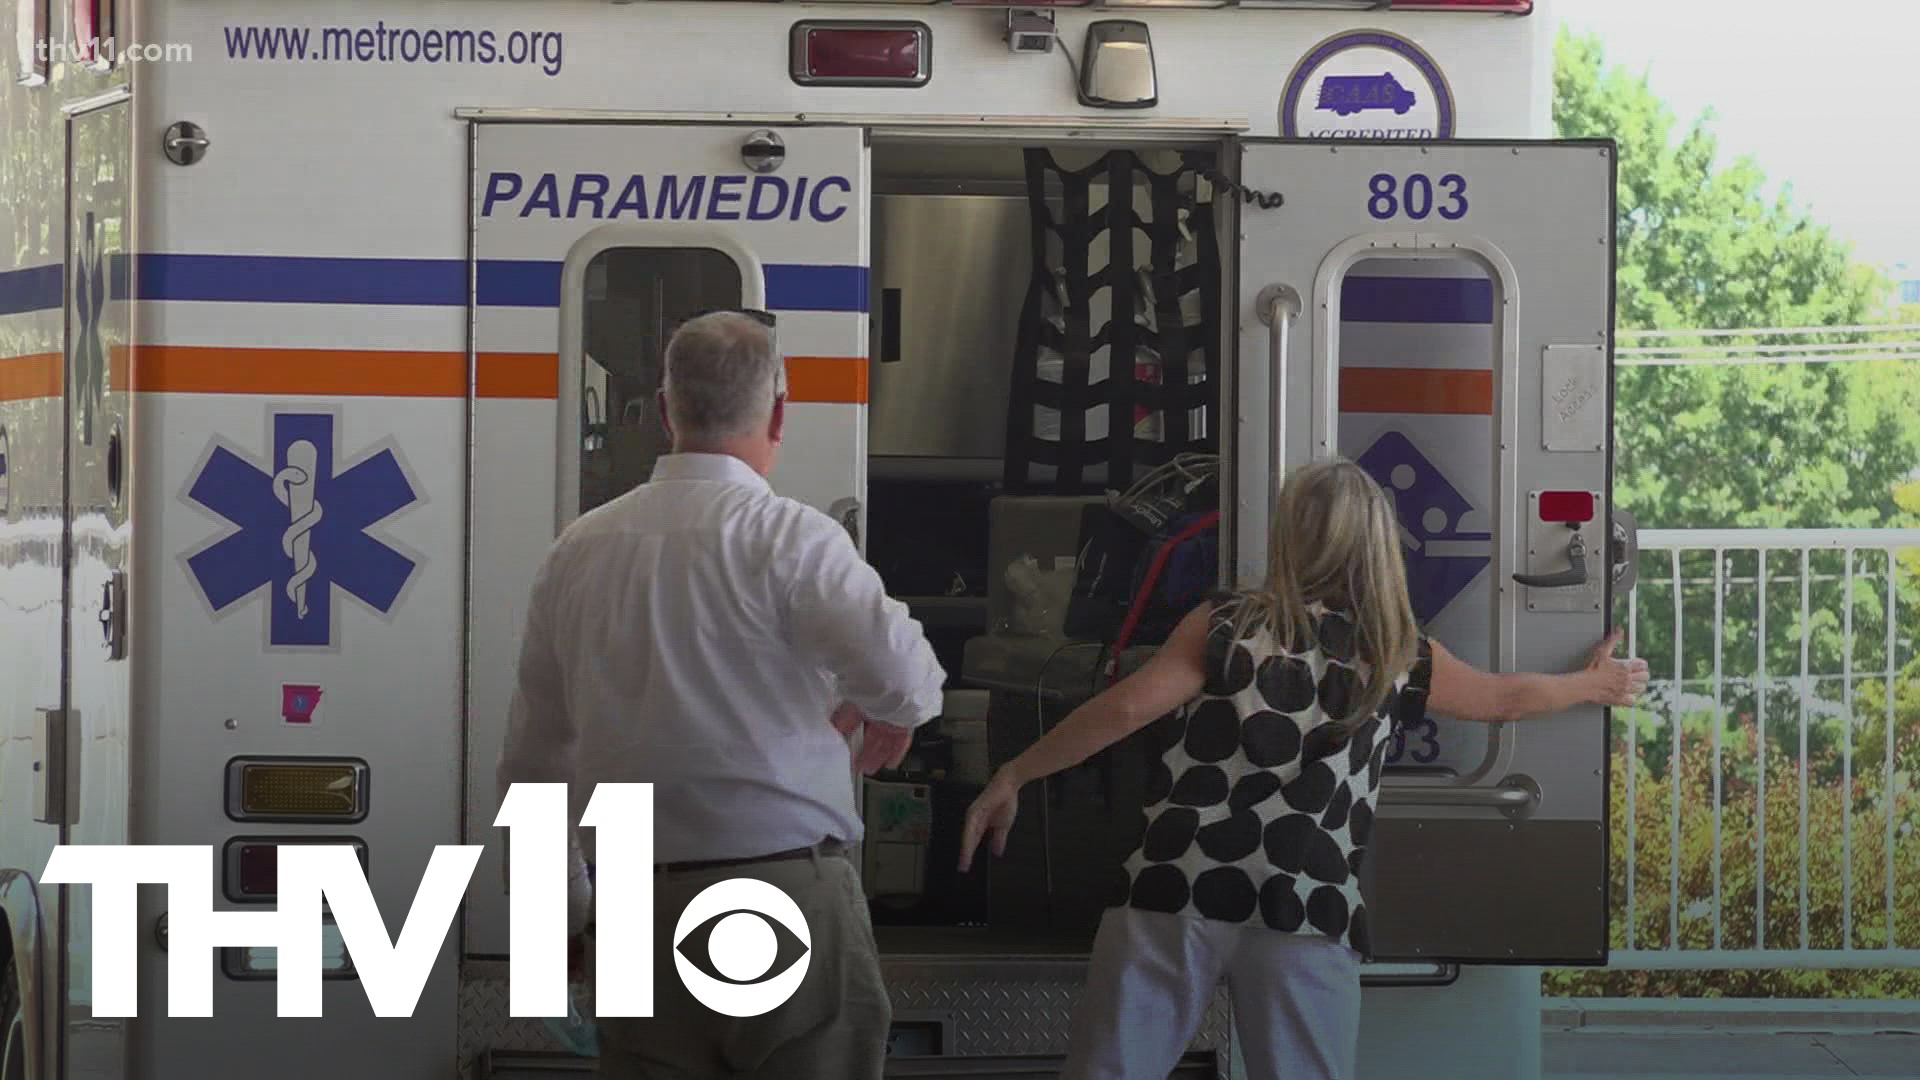 The decreasing number of ICU beds throughout Arkansas has caused an increase in wait times for ambulances that are looking for a bed for patients.